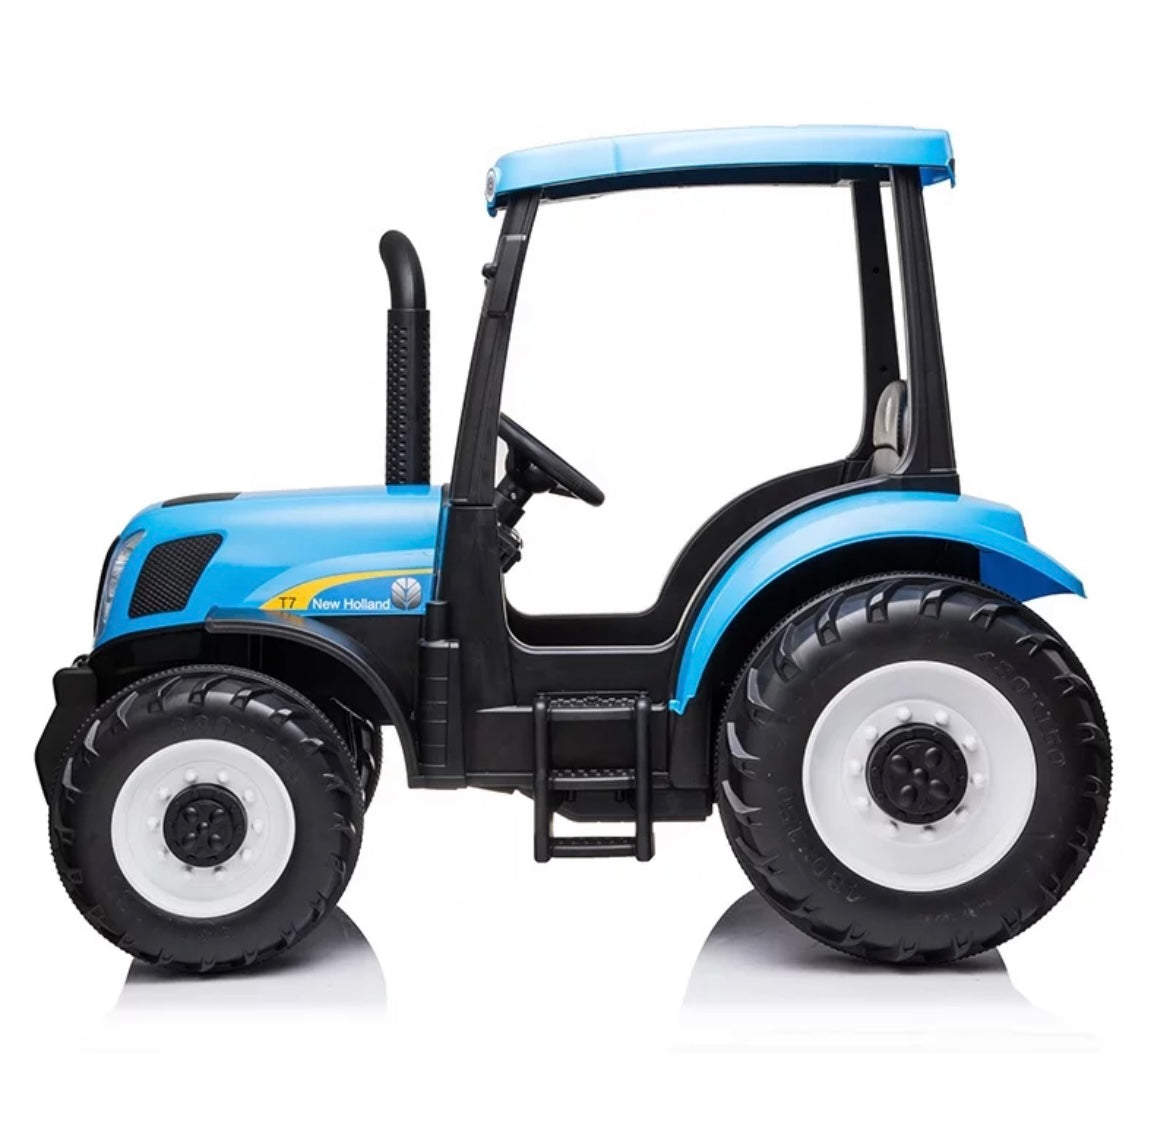 New Holland 24v ride on tractor